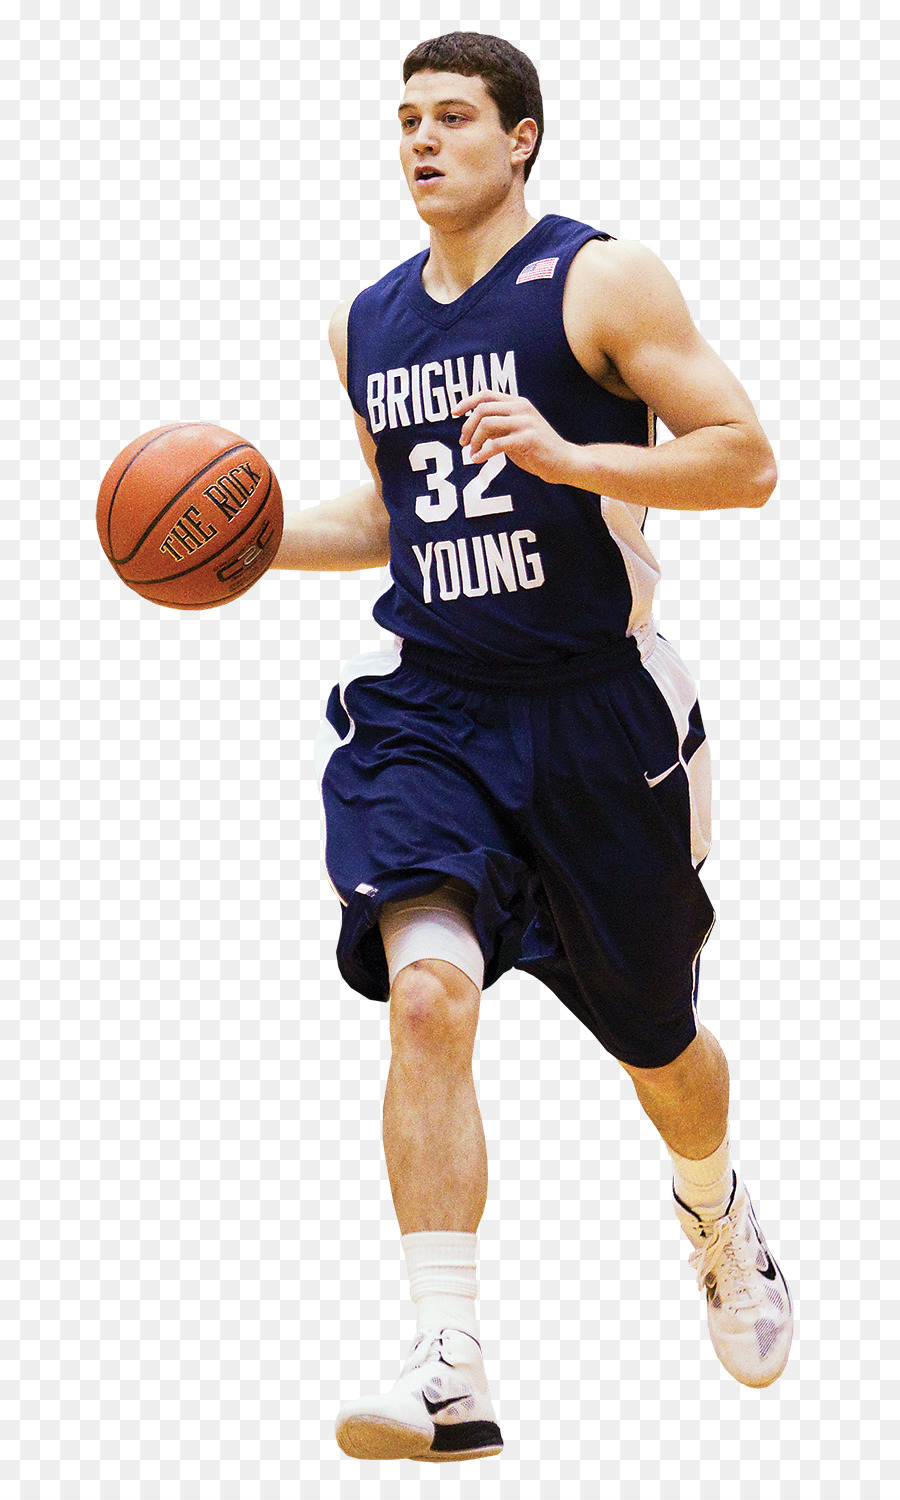 Jimmer Fredette giocatore di Basket PCD Pharma Franchising Serbia Molecole Private Limited Brigham Young University - Basket